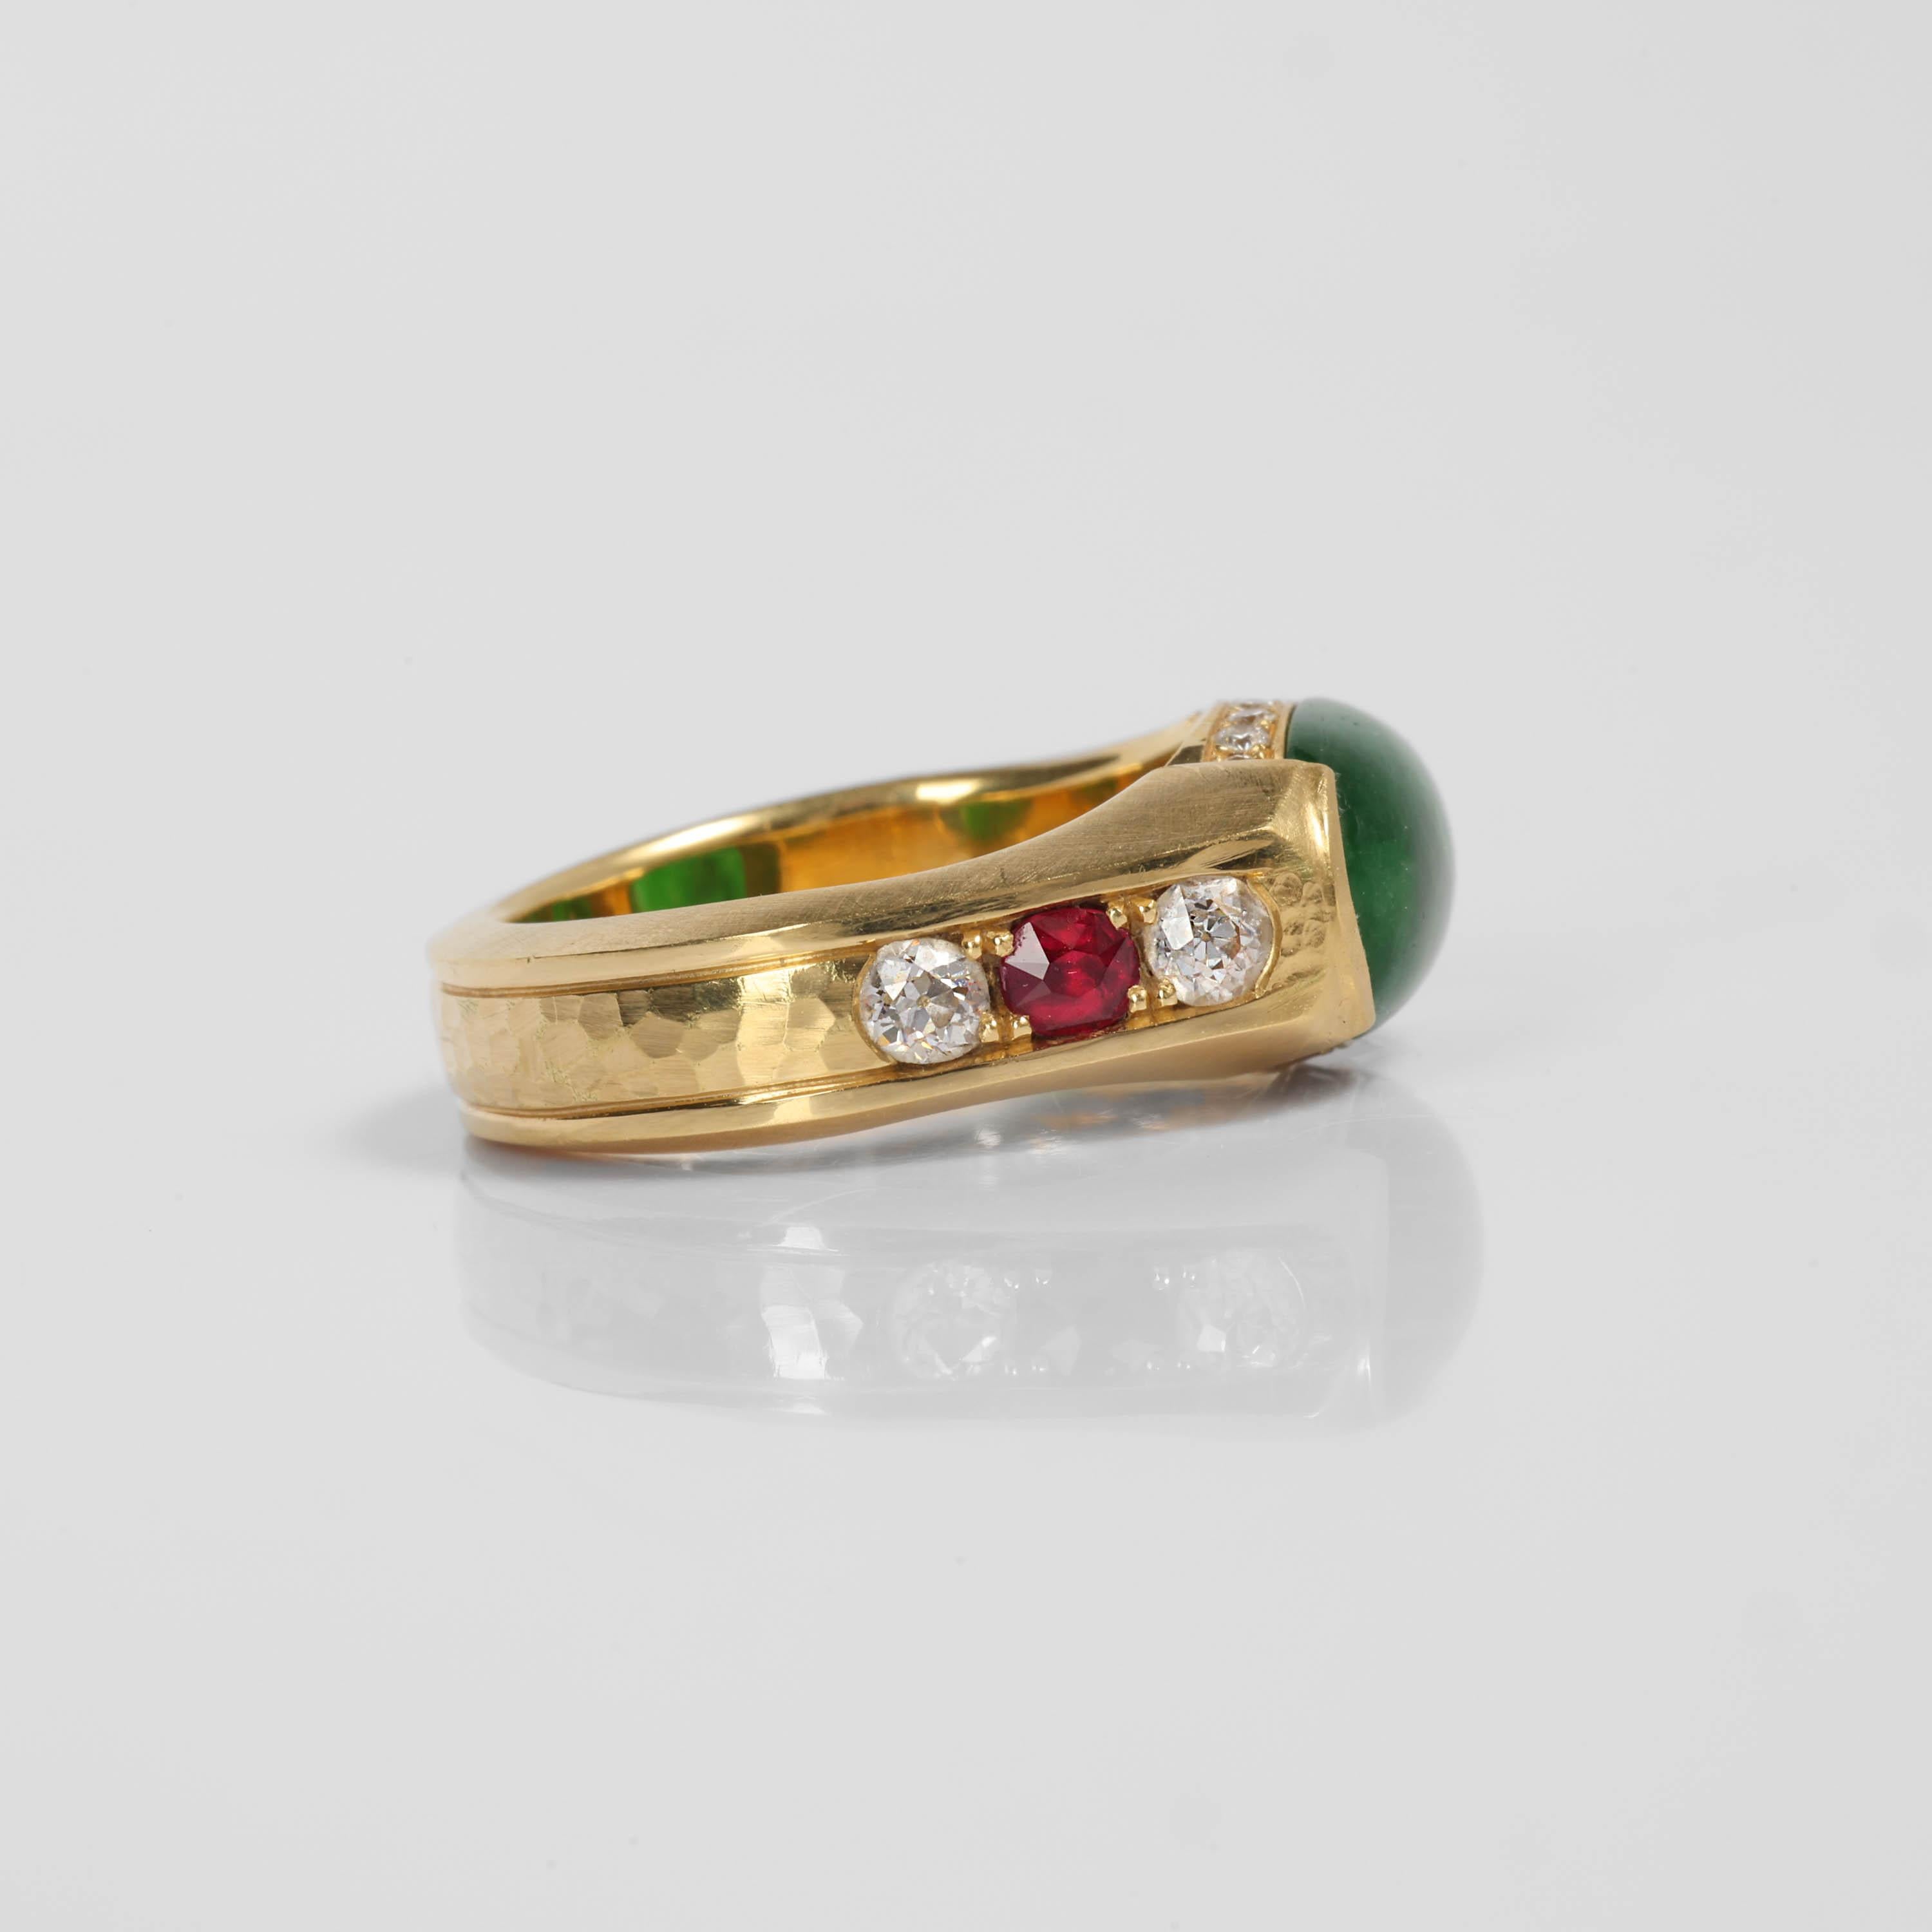 Cabochon Men's Jade Ring with Rubies, Diamonds, Custom, 18k, Certified Untreated For Sale